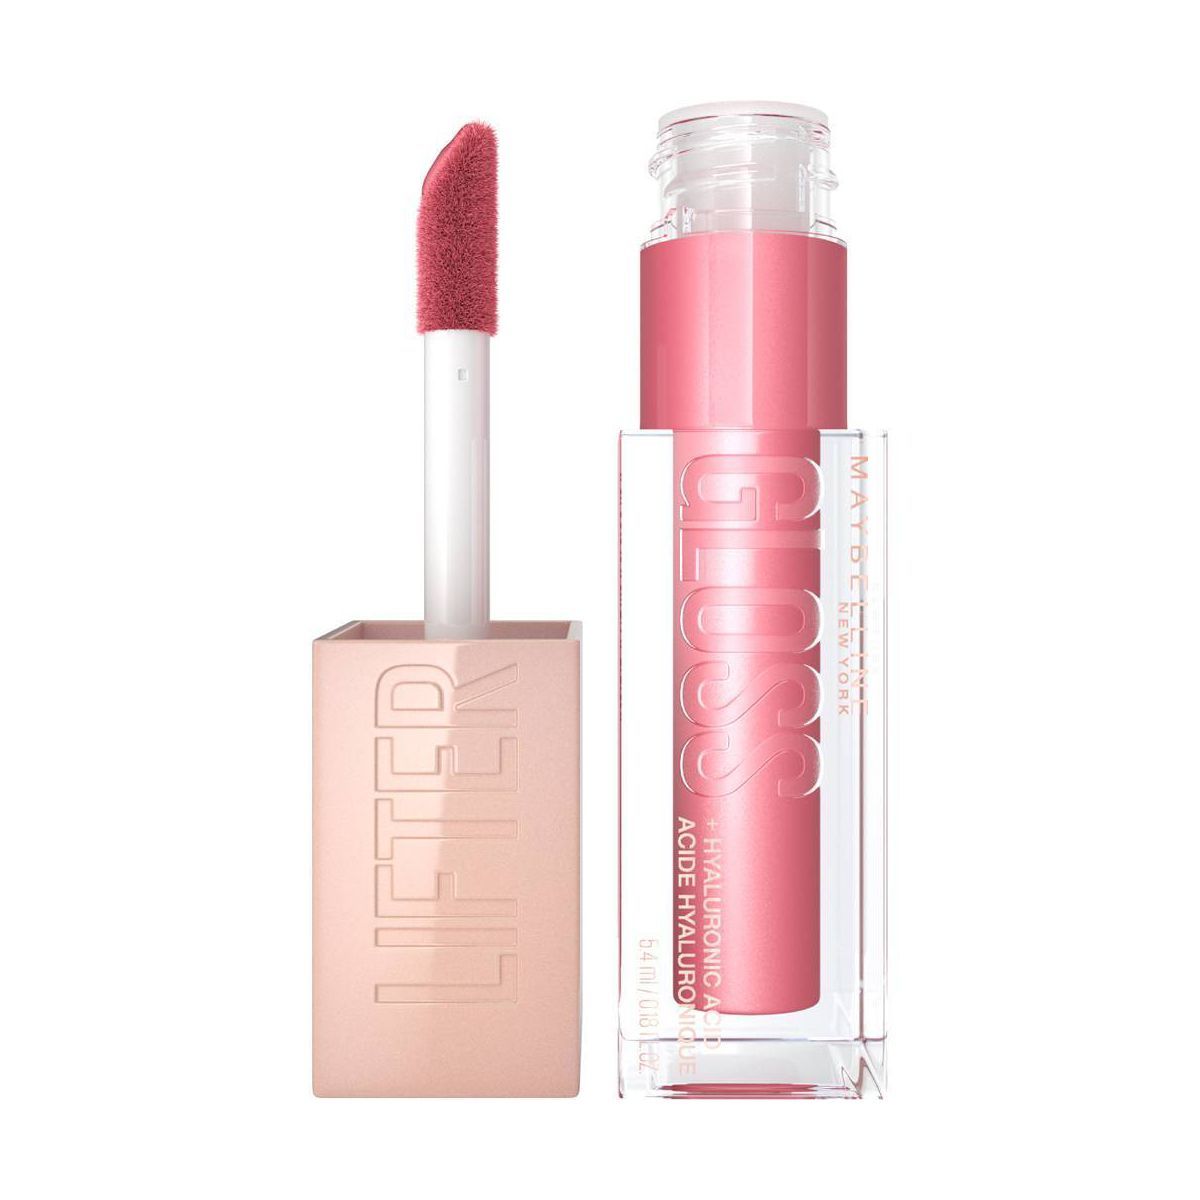 Maybelline Lifter Gloss Plumping Lip Gloss with Hyaluronic Acid - 0.18 fl oz | Target